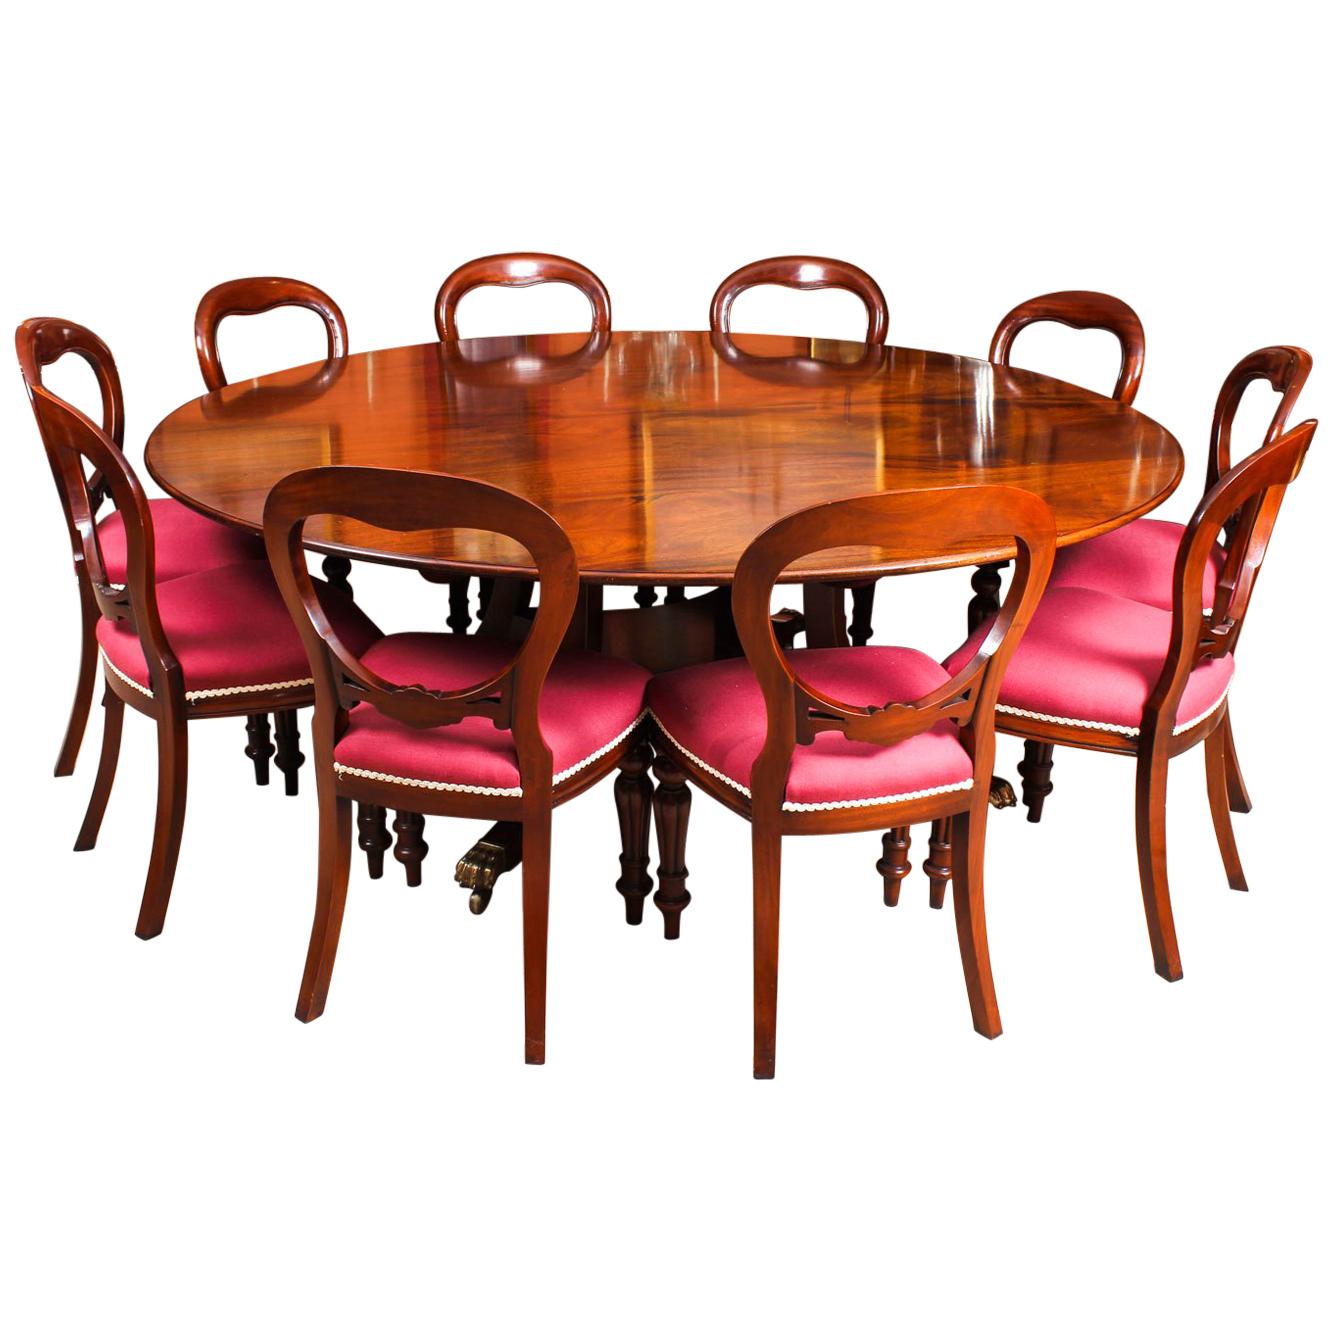 Vintage "Dining Table by William Tillman, Harrods & 10 Chairs 20th Century